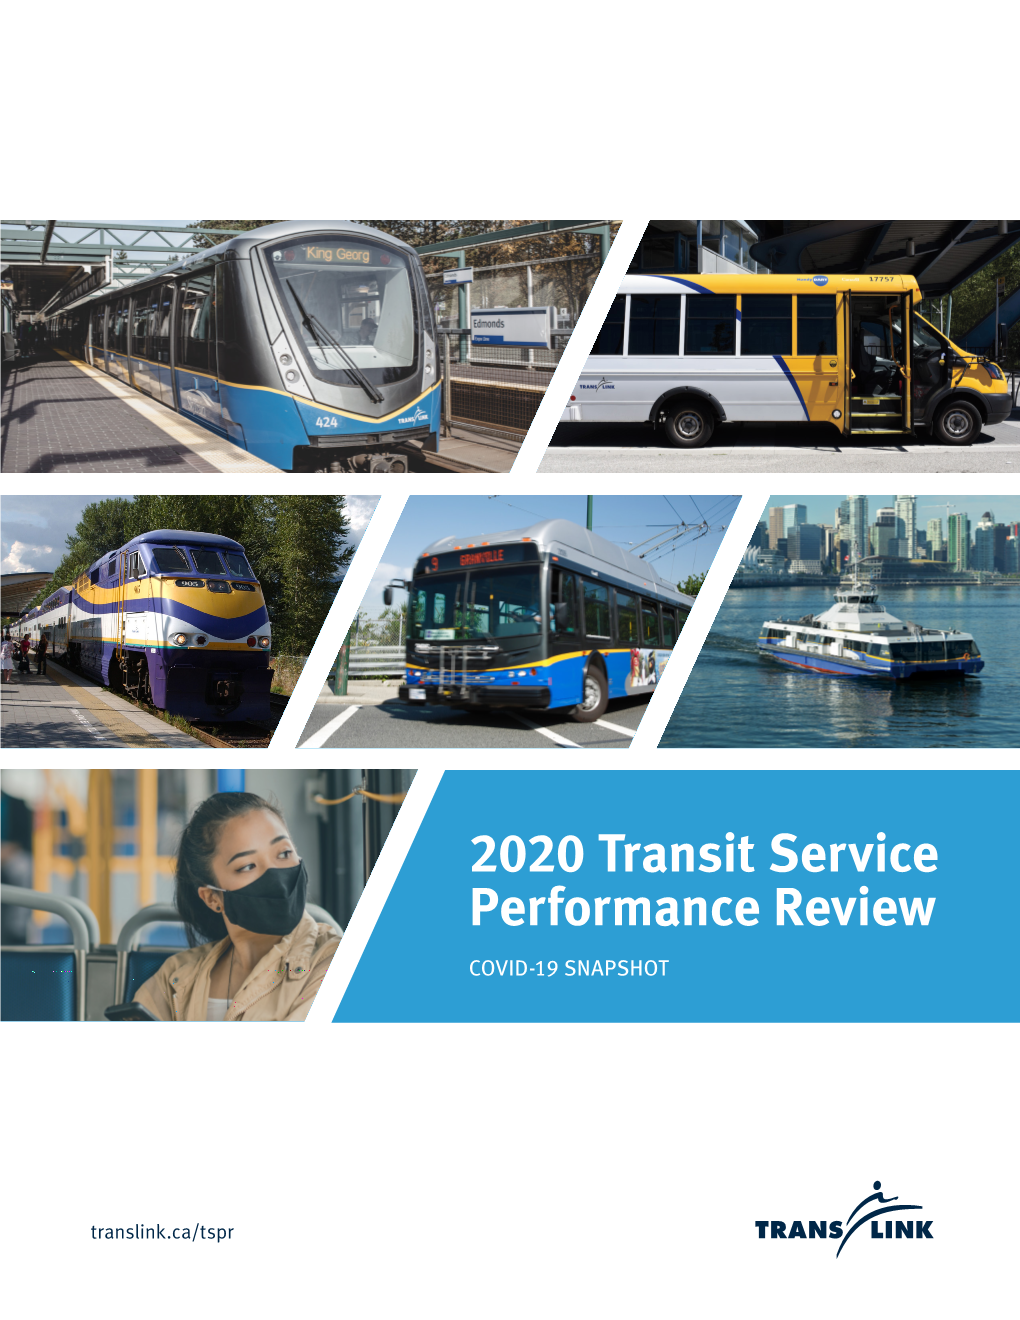 2020 Transit Service Performance Review COVID-19 SNAPSHOT